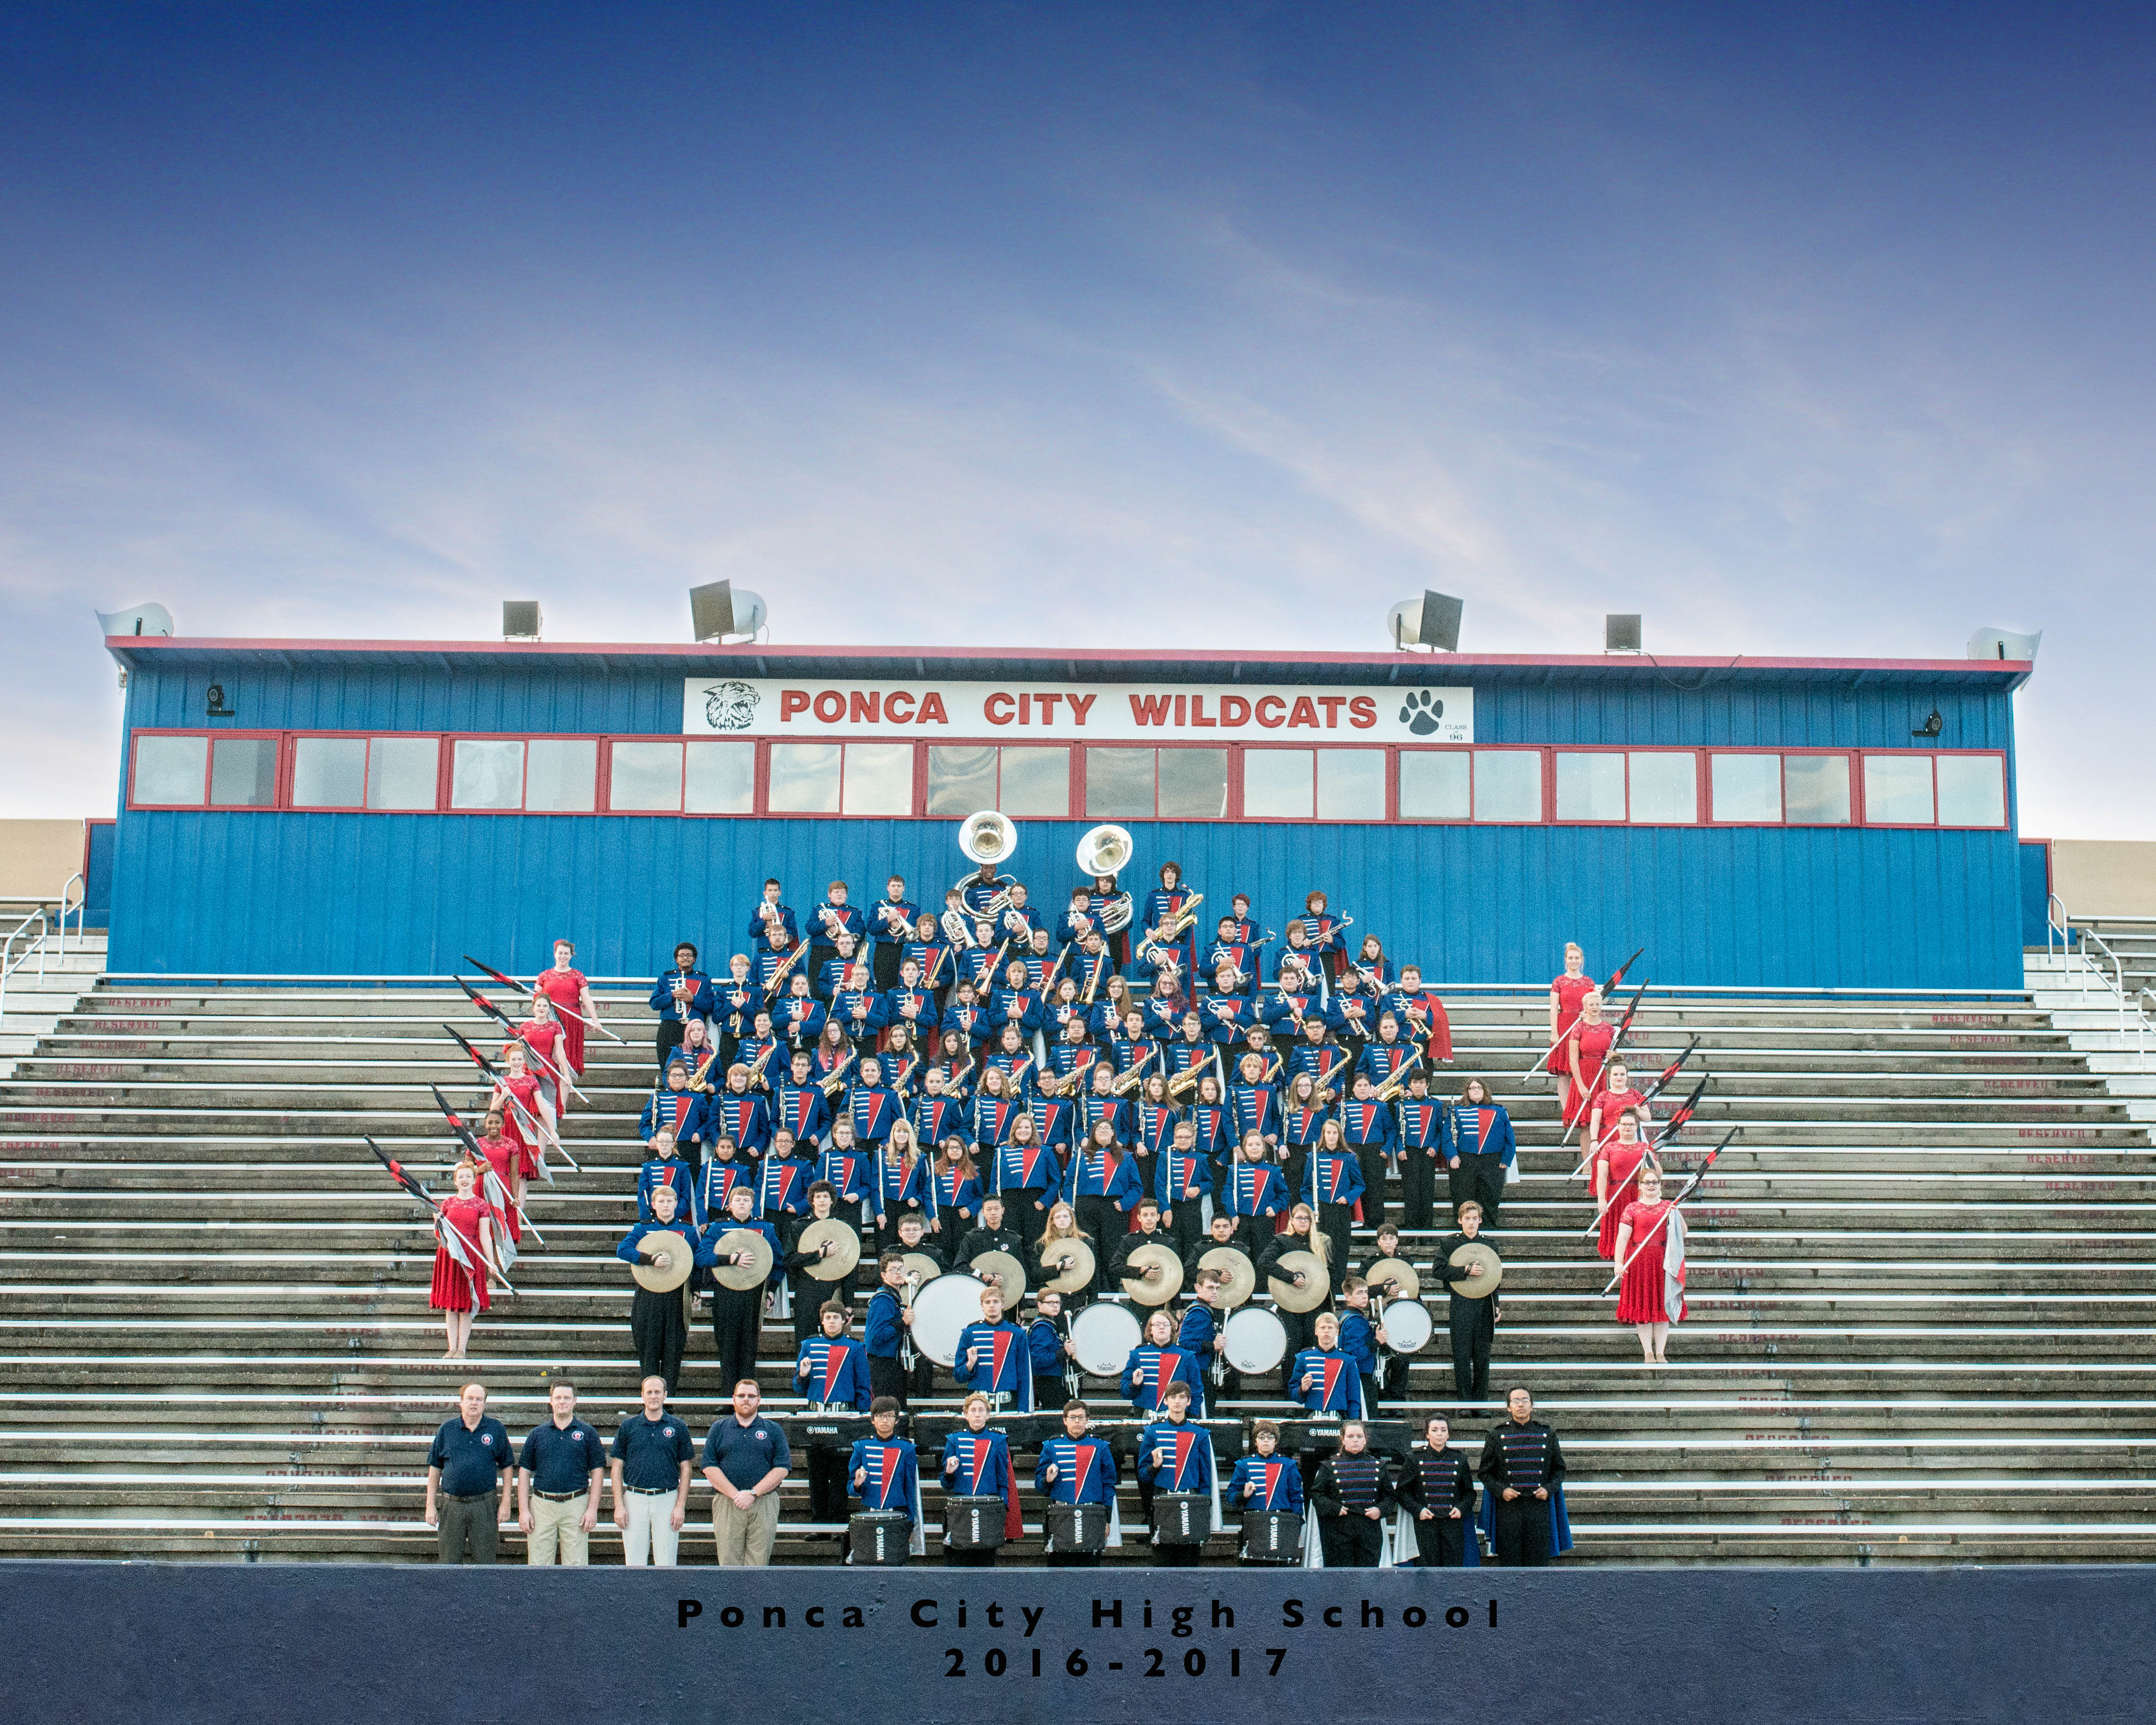 Po-Hi Band Earns Spots in Red Carpet High School Honor Band   